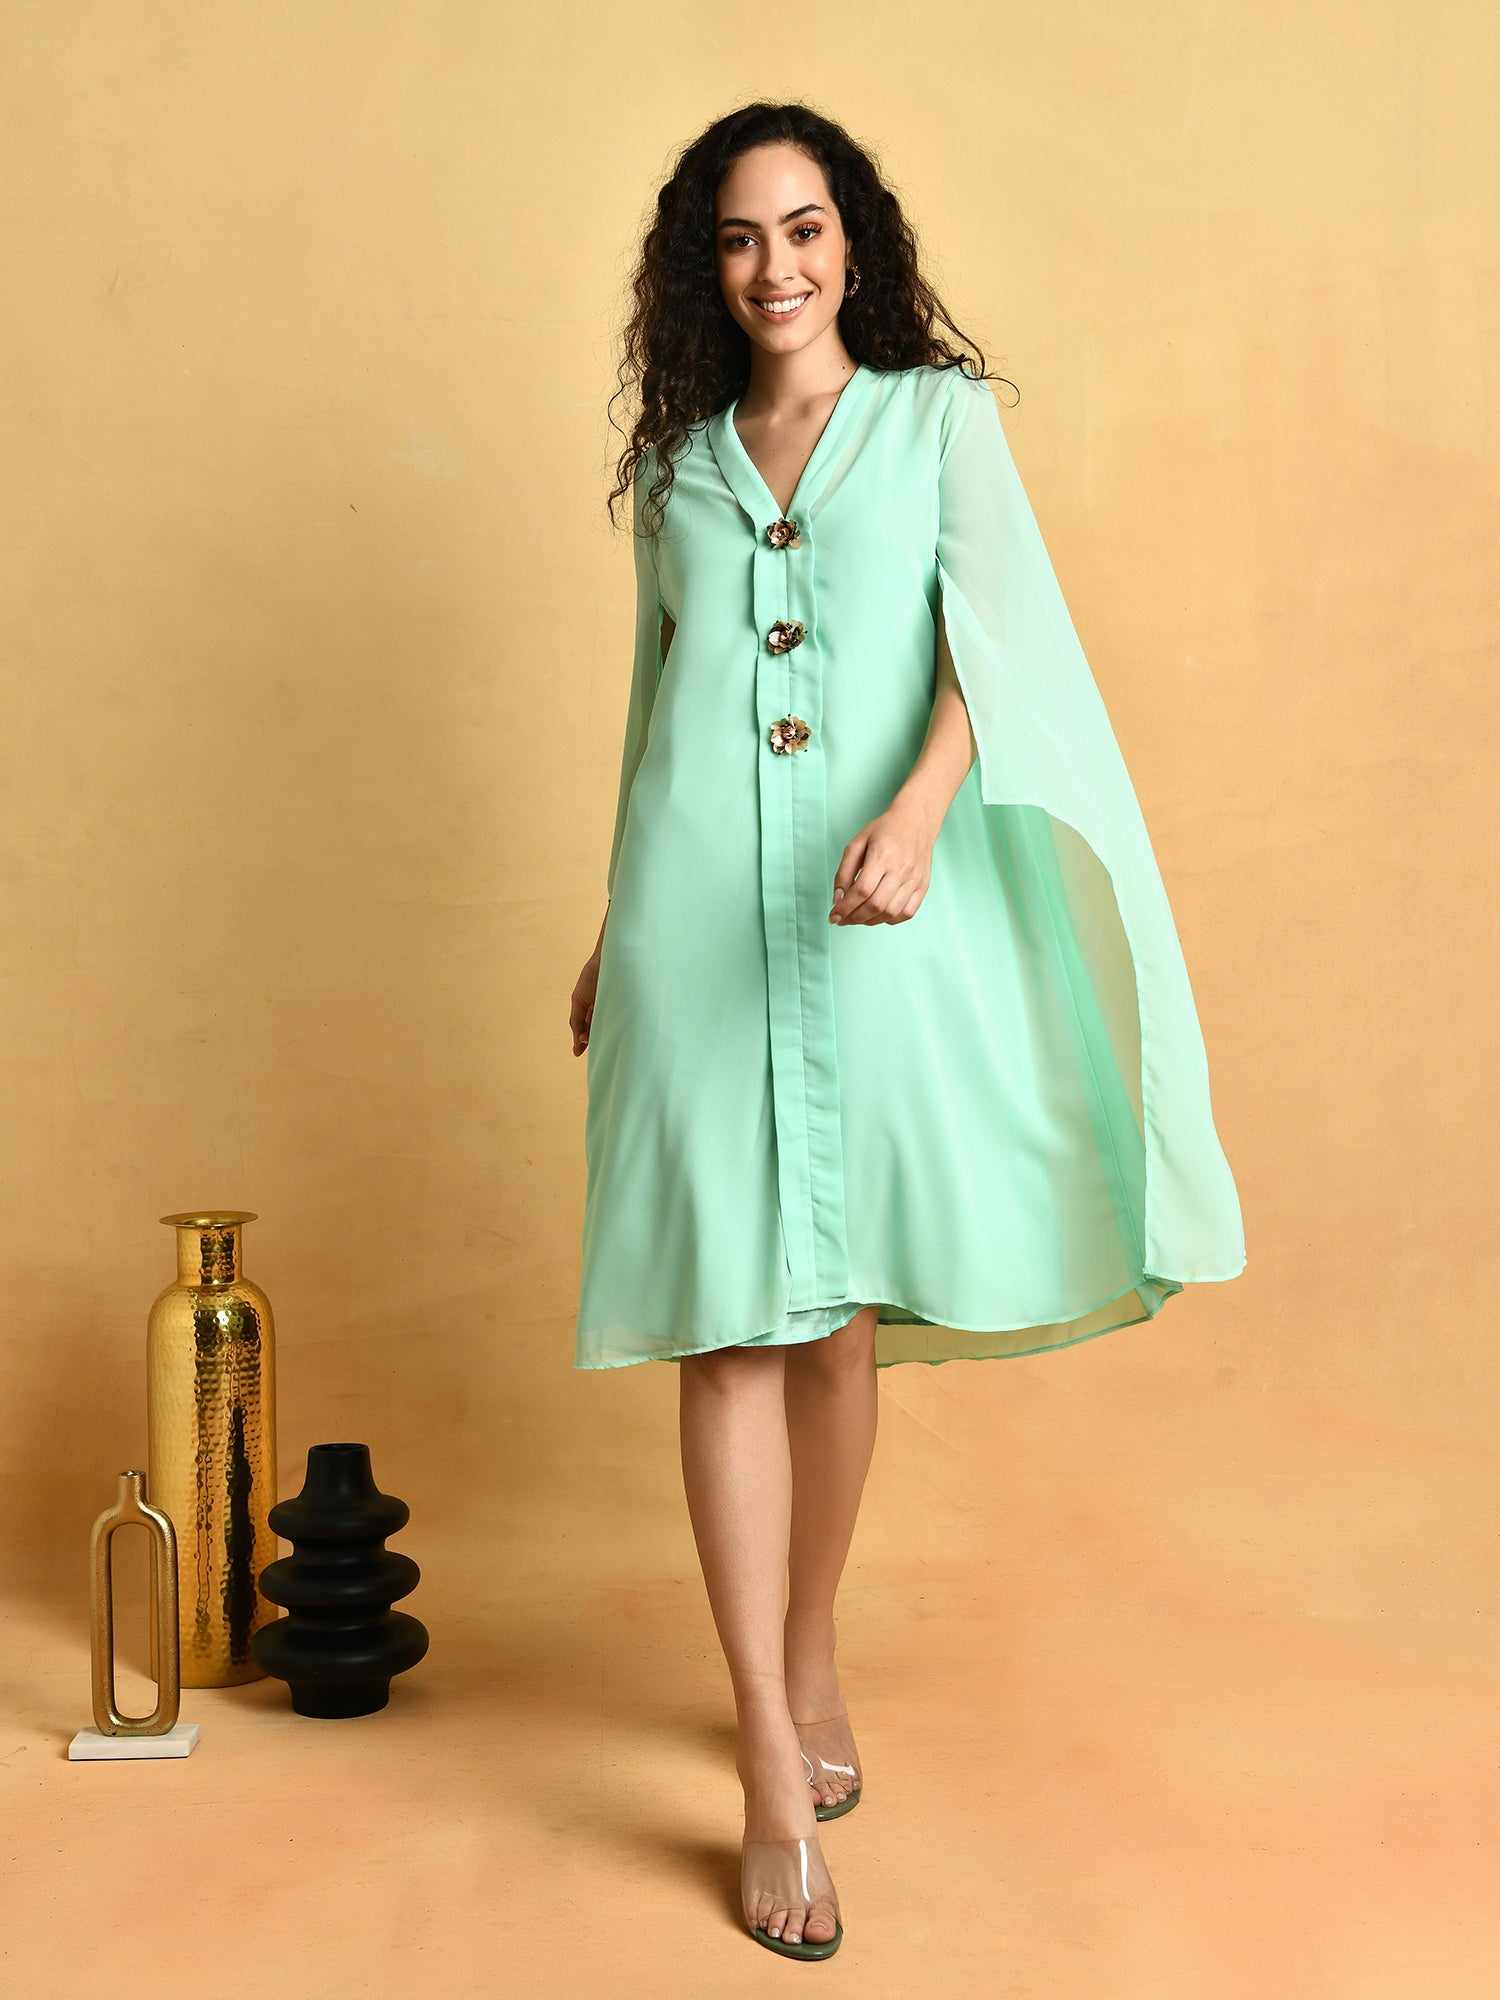 attic curves pastel green dress with placket embellishment